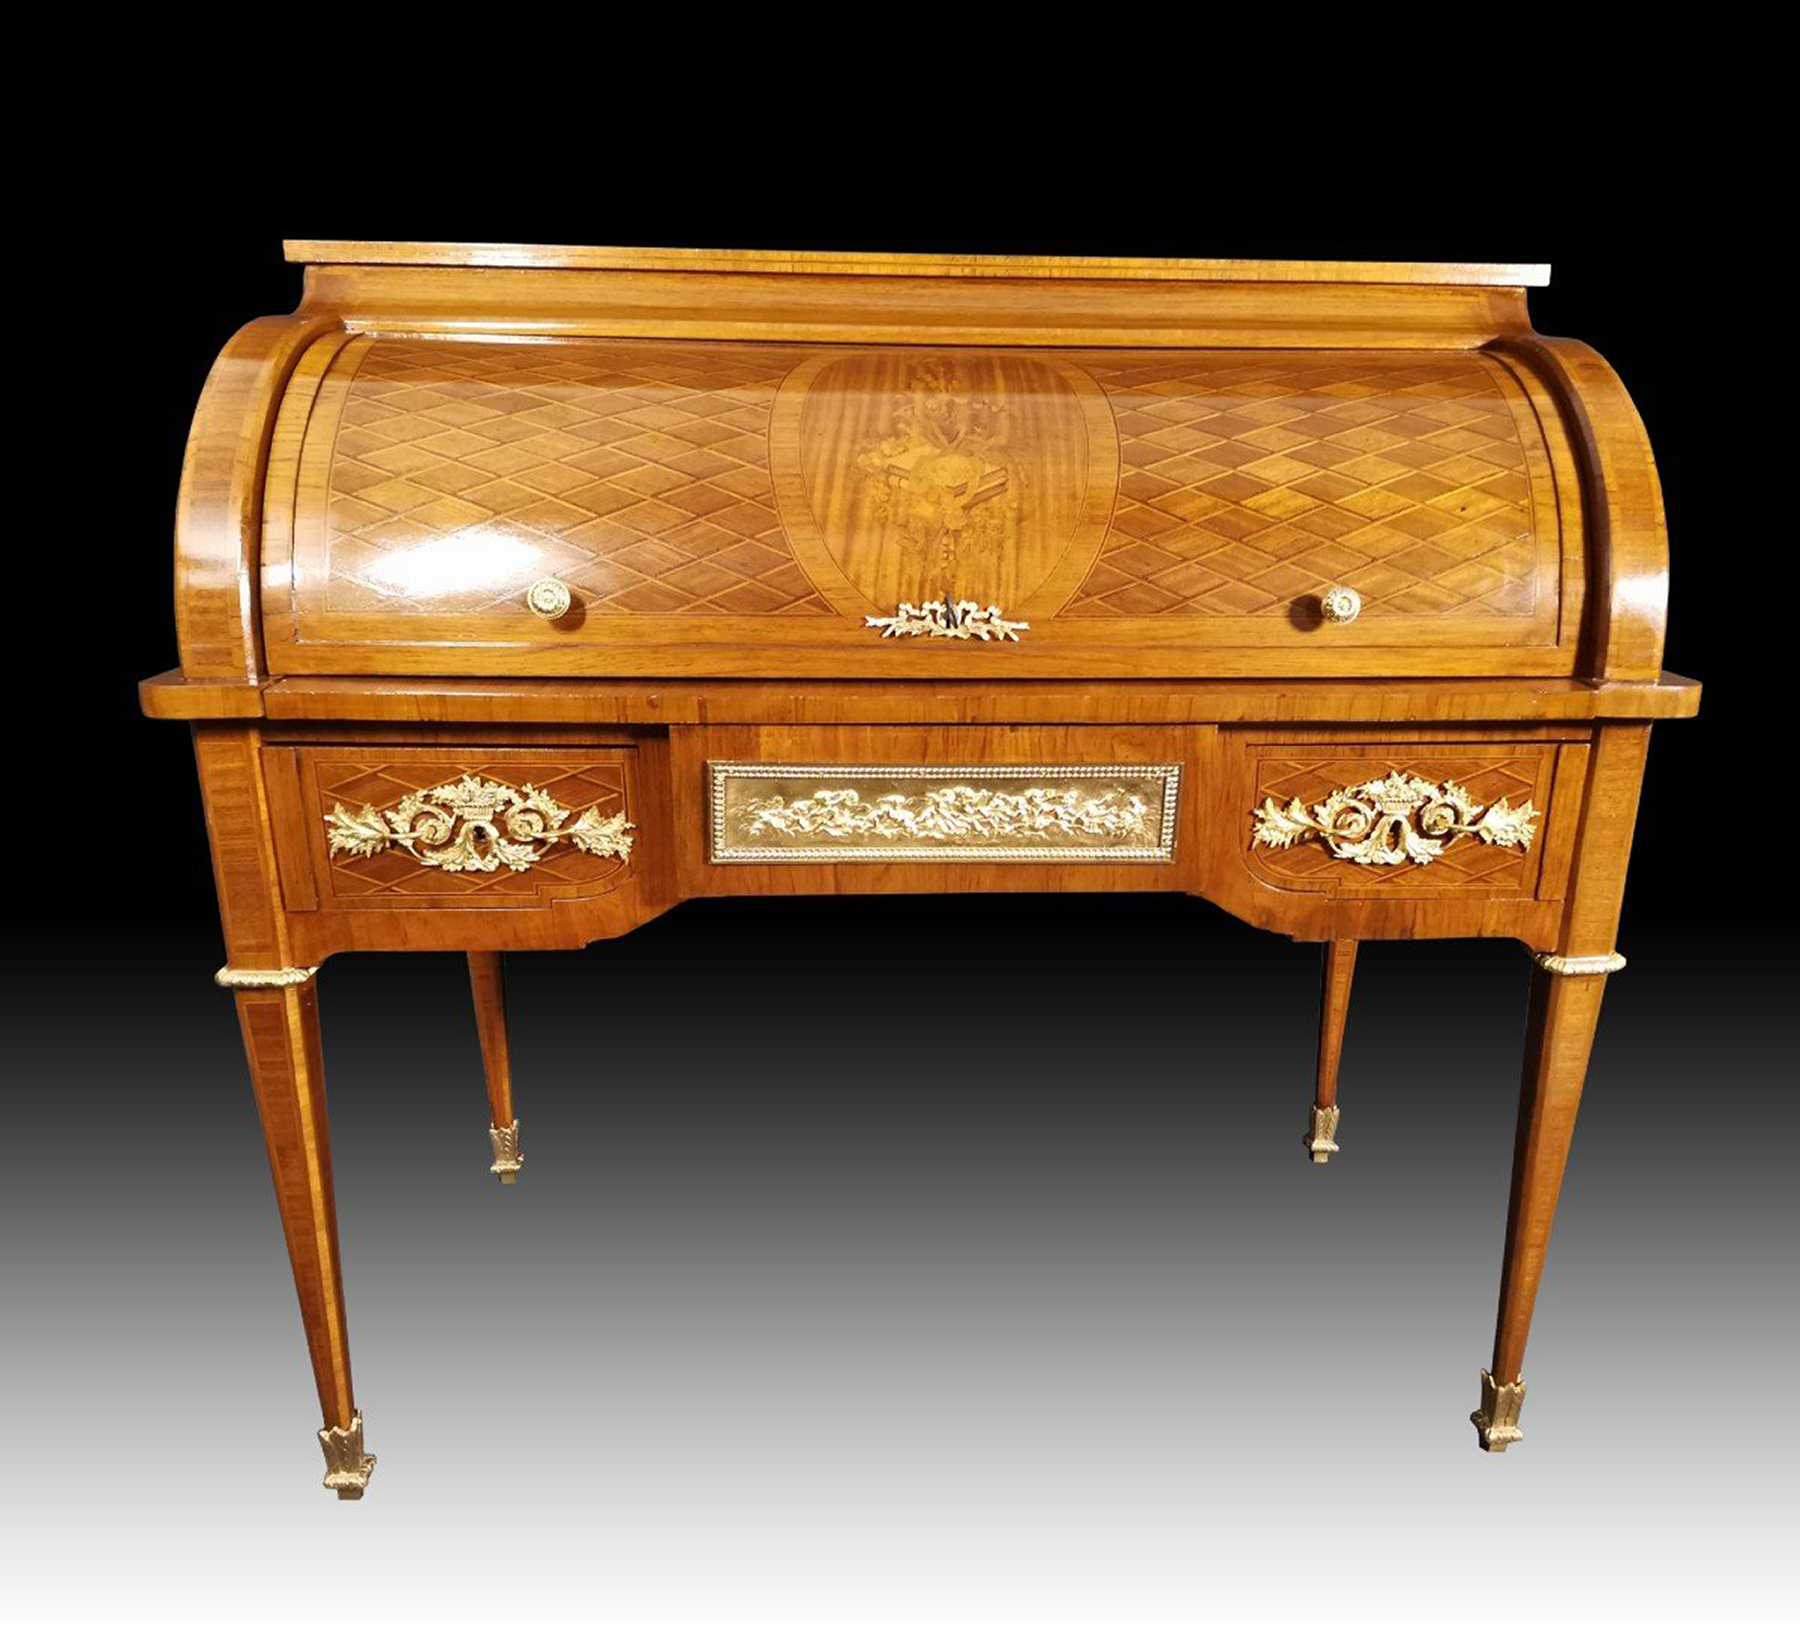 19th century cylindrical desk in Louis XVI style marquetry, 19th century - Image 7 of 7